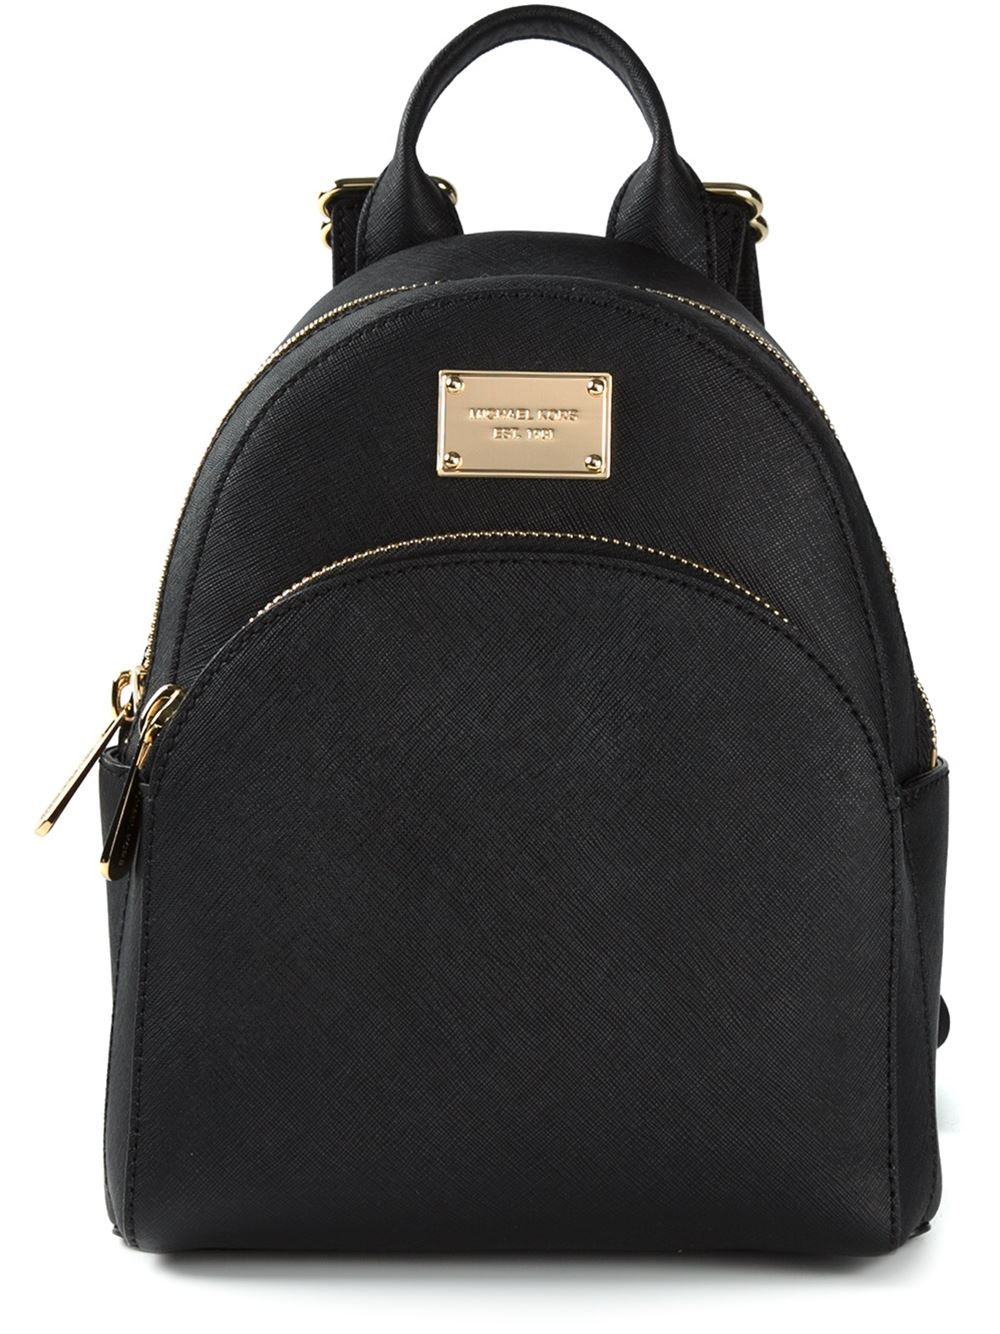 Michael kors Small Backpack in Black | Lyst